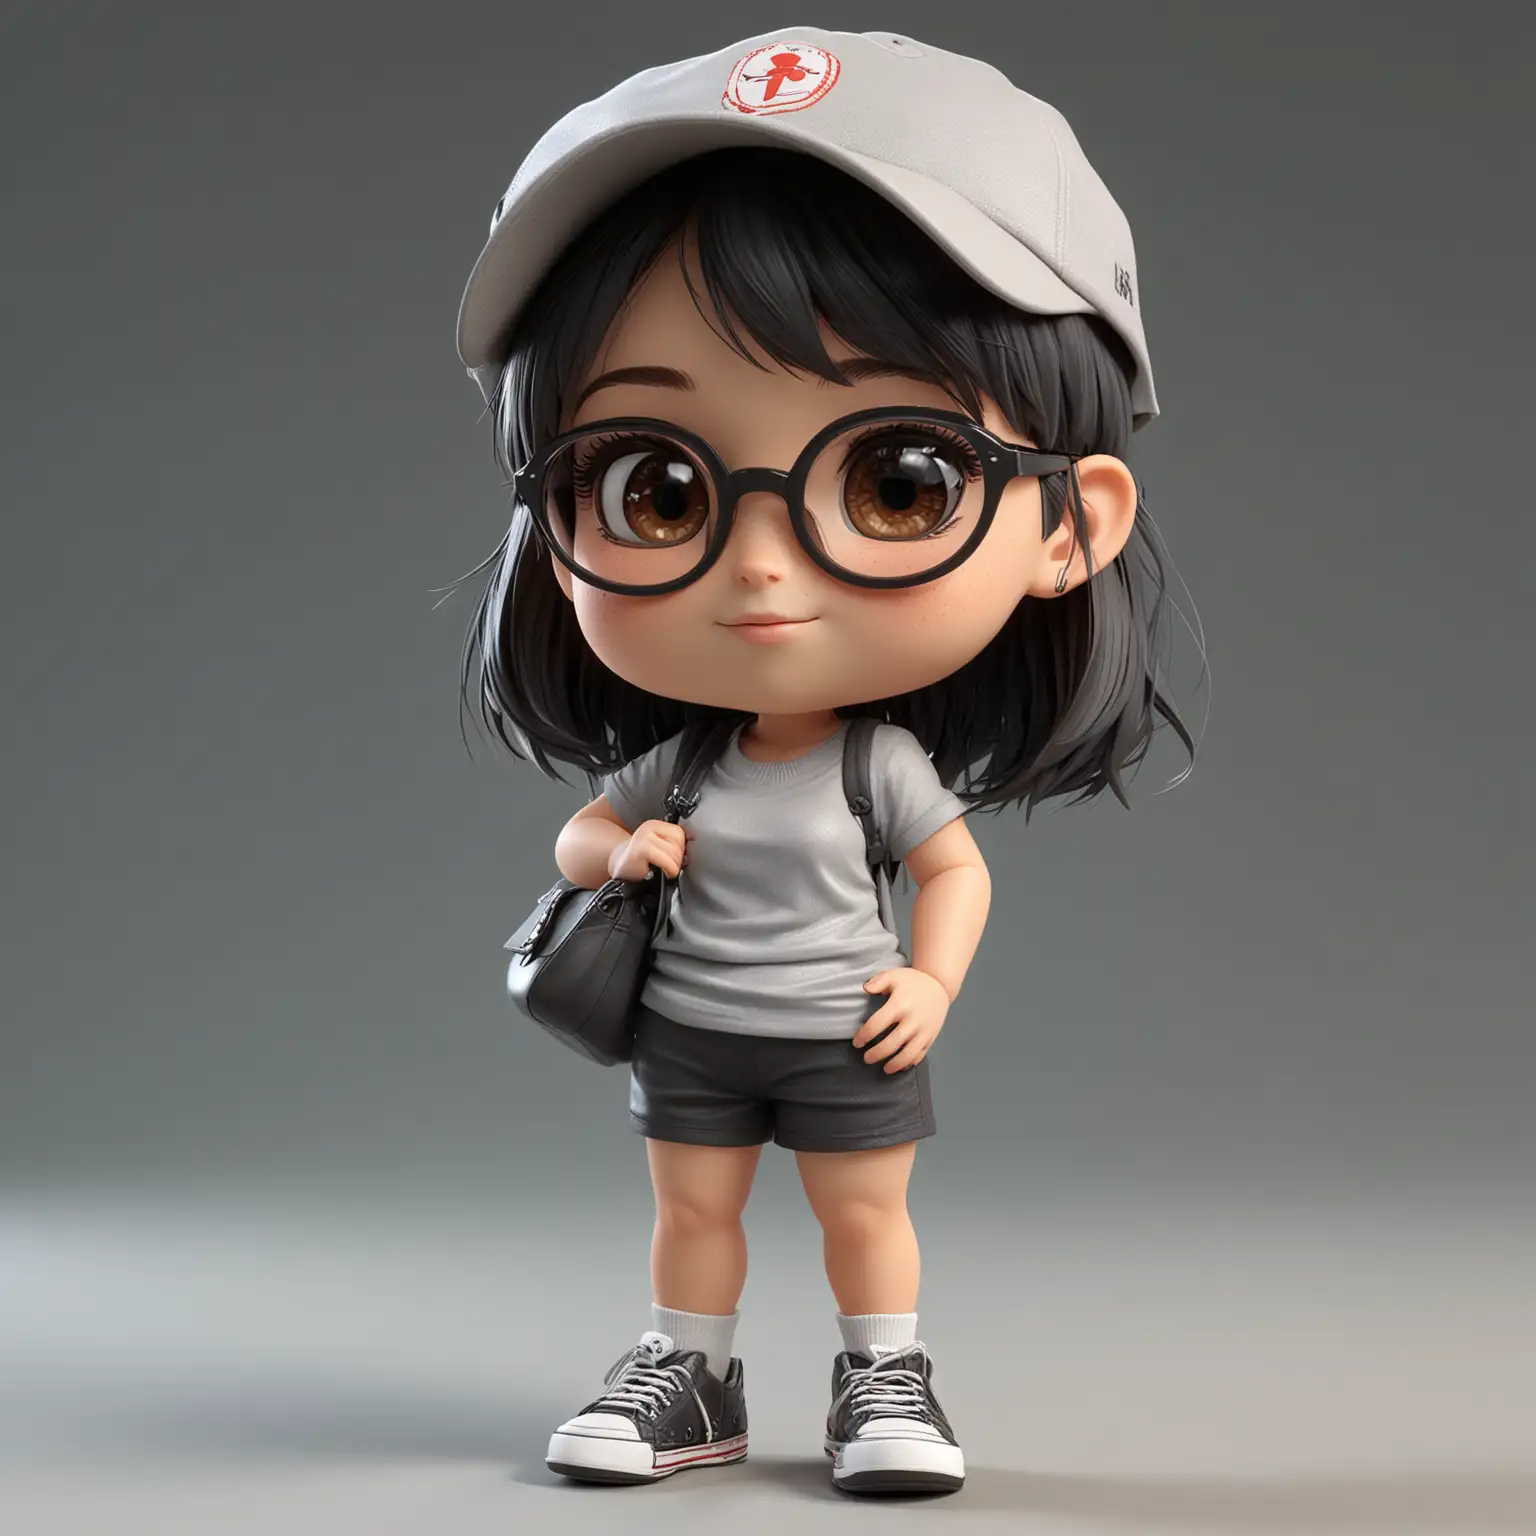 Cute-Pux-Girl-Toy-Character-with-Baseball-Cap-and-Handbag